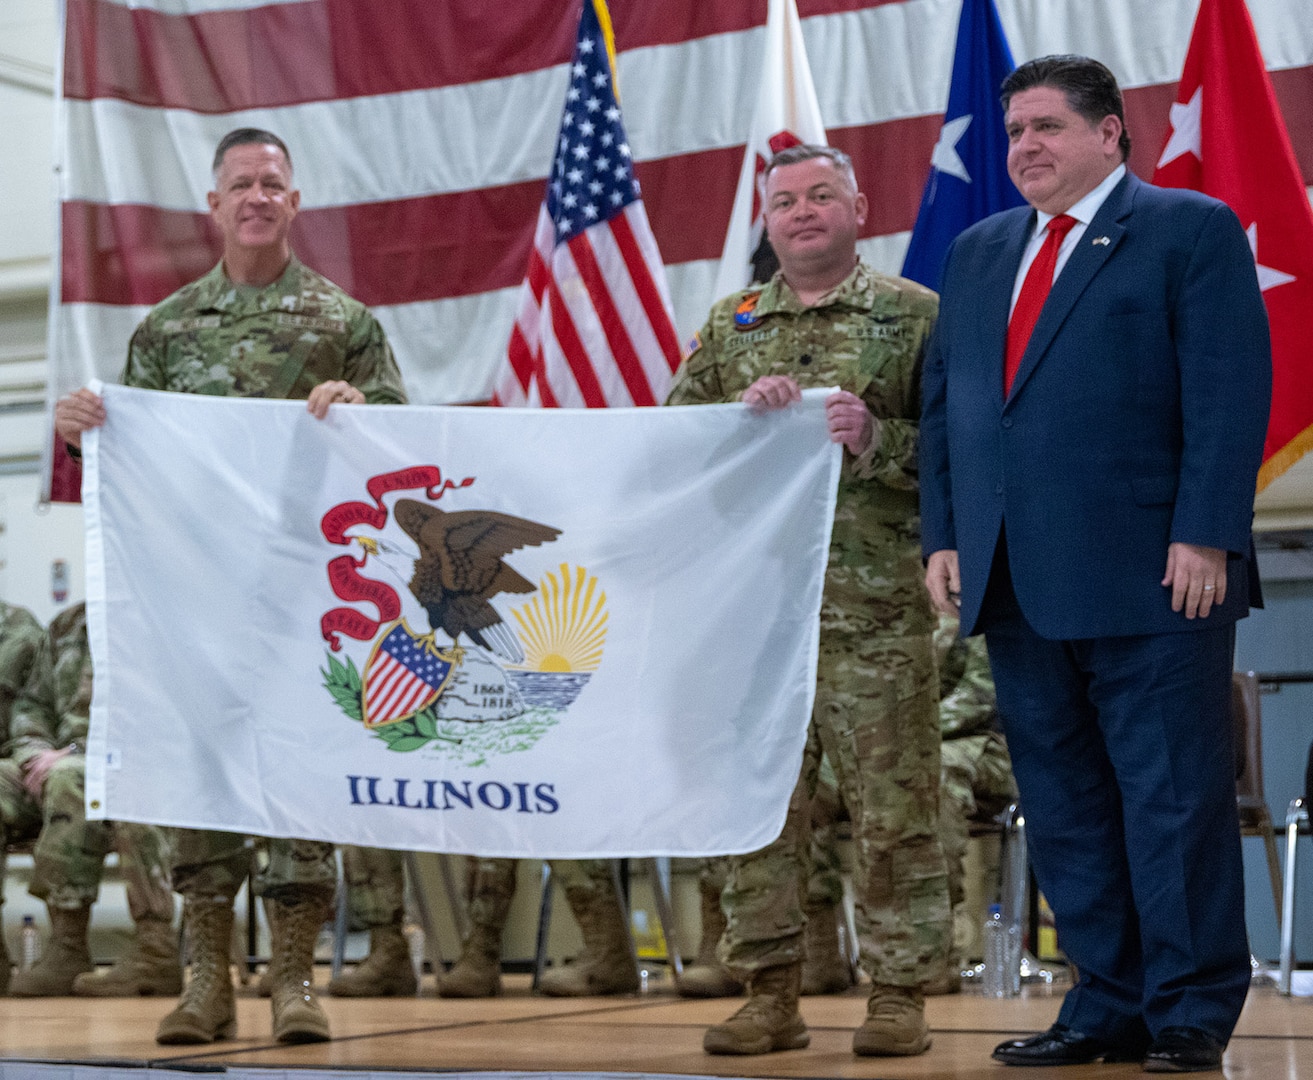 Illinois Gov. JB Pritzker, right, and Maj. Gen. Rodney Boyd, the Adjutant General of Illinois and Commander of the Illinois National Guard, presents Lt. Col. Jason Celletti, commander, 1st Assault Helicopter Battalion, 106th Aviation Regiment, with an Illinois state flag during the mobilization ceremony Feb. 7 at the 182nd Airlift Wing, Peoria. The flag will travel with the unit as they deploy to the U.S. Central Command area of responsibility.